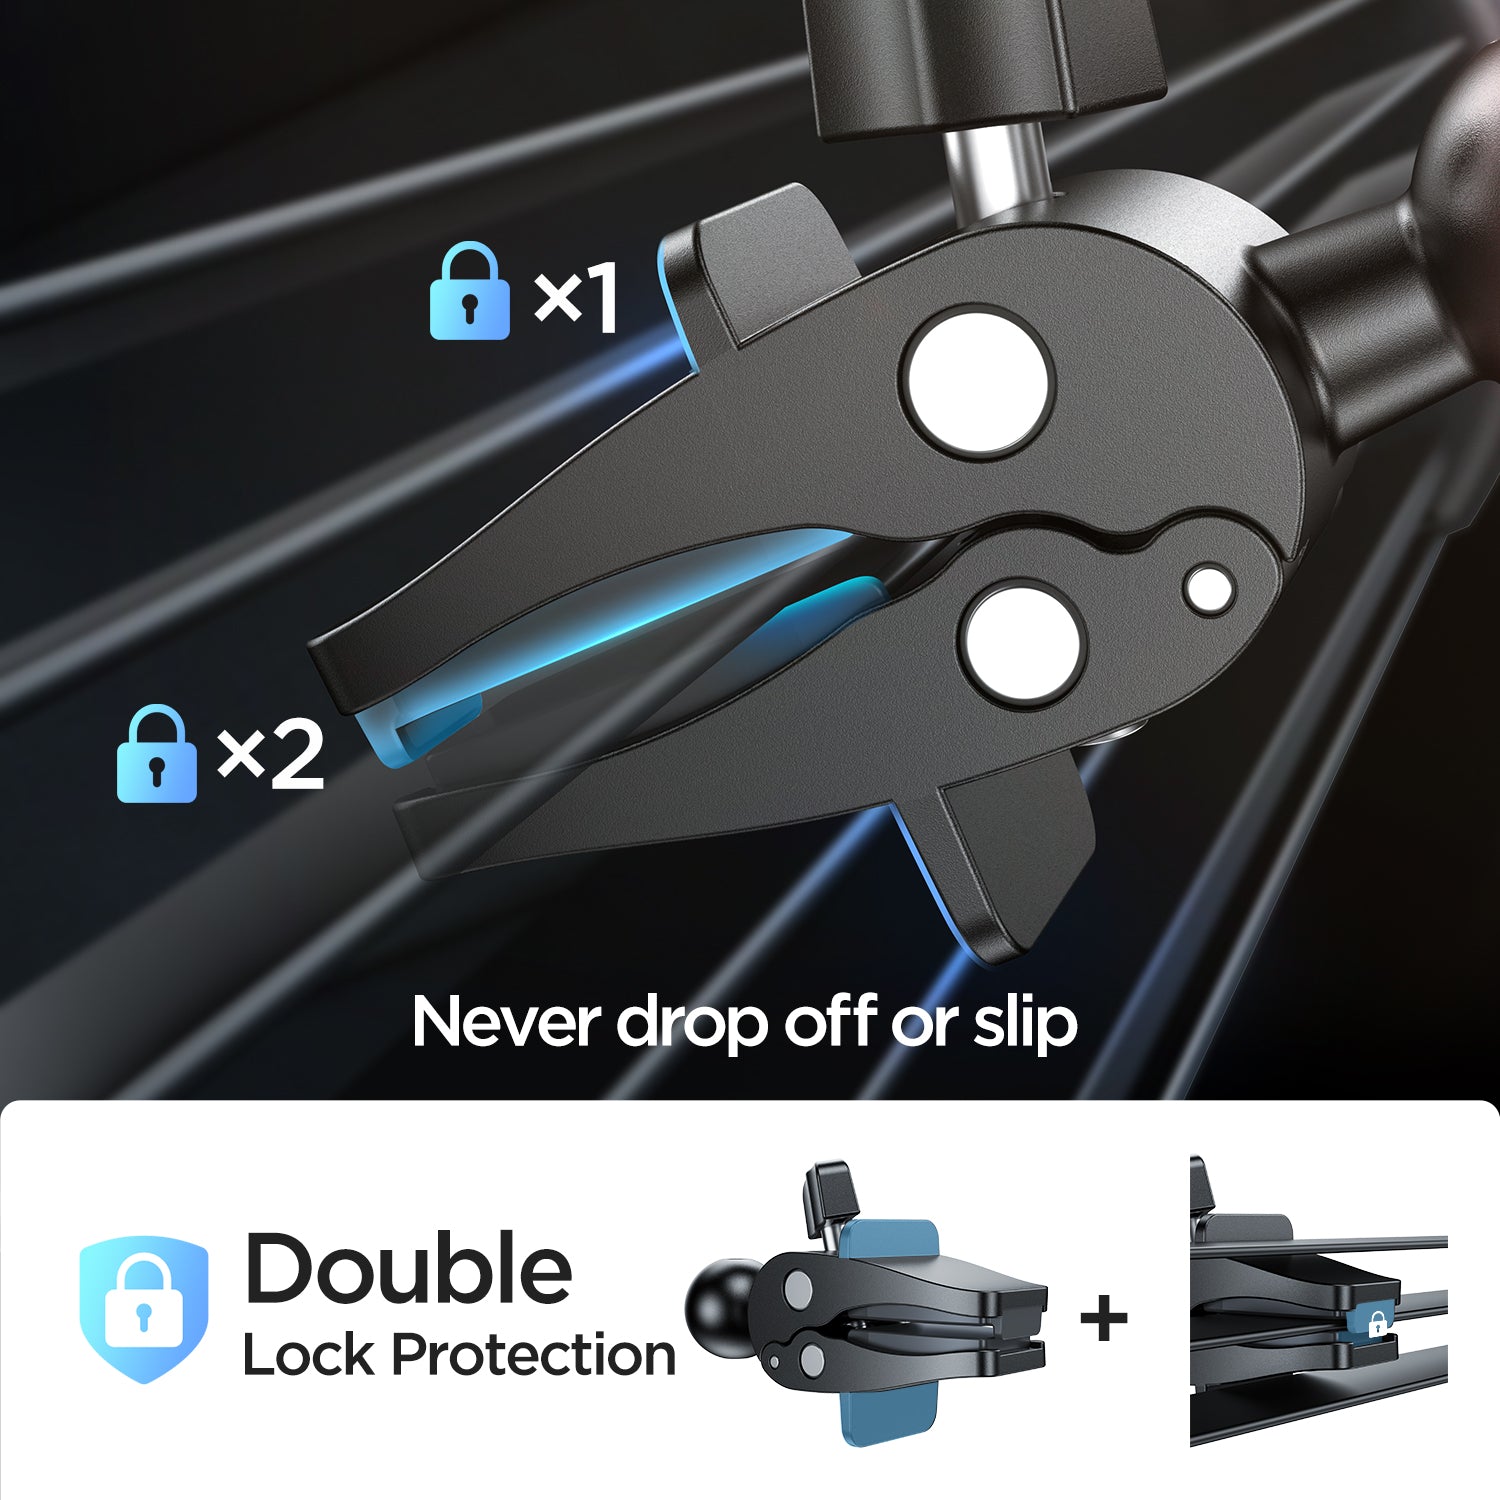 Double Lock Protection